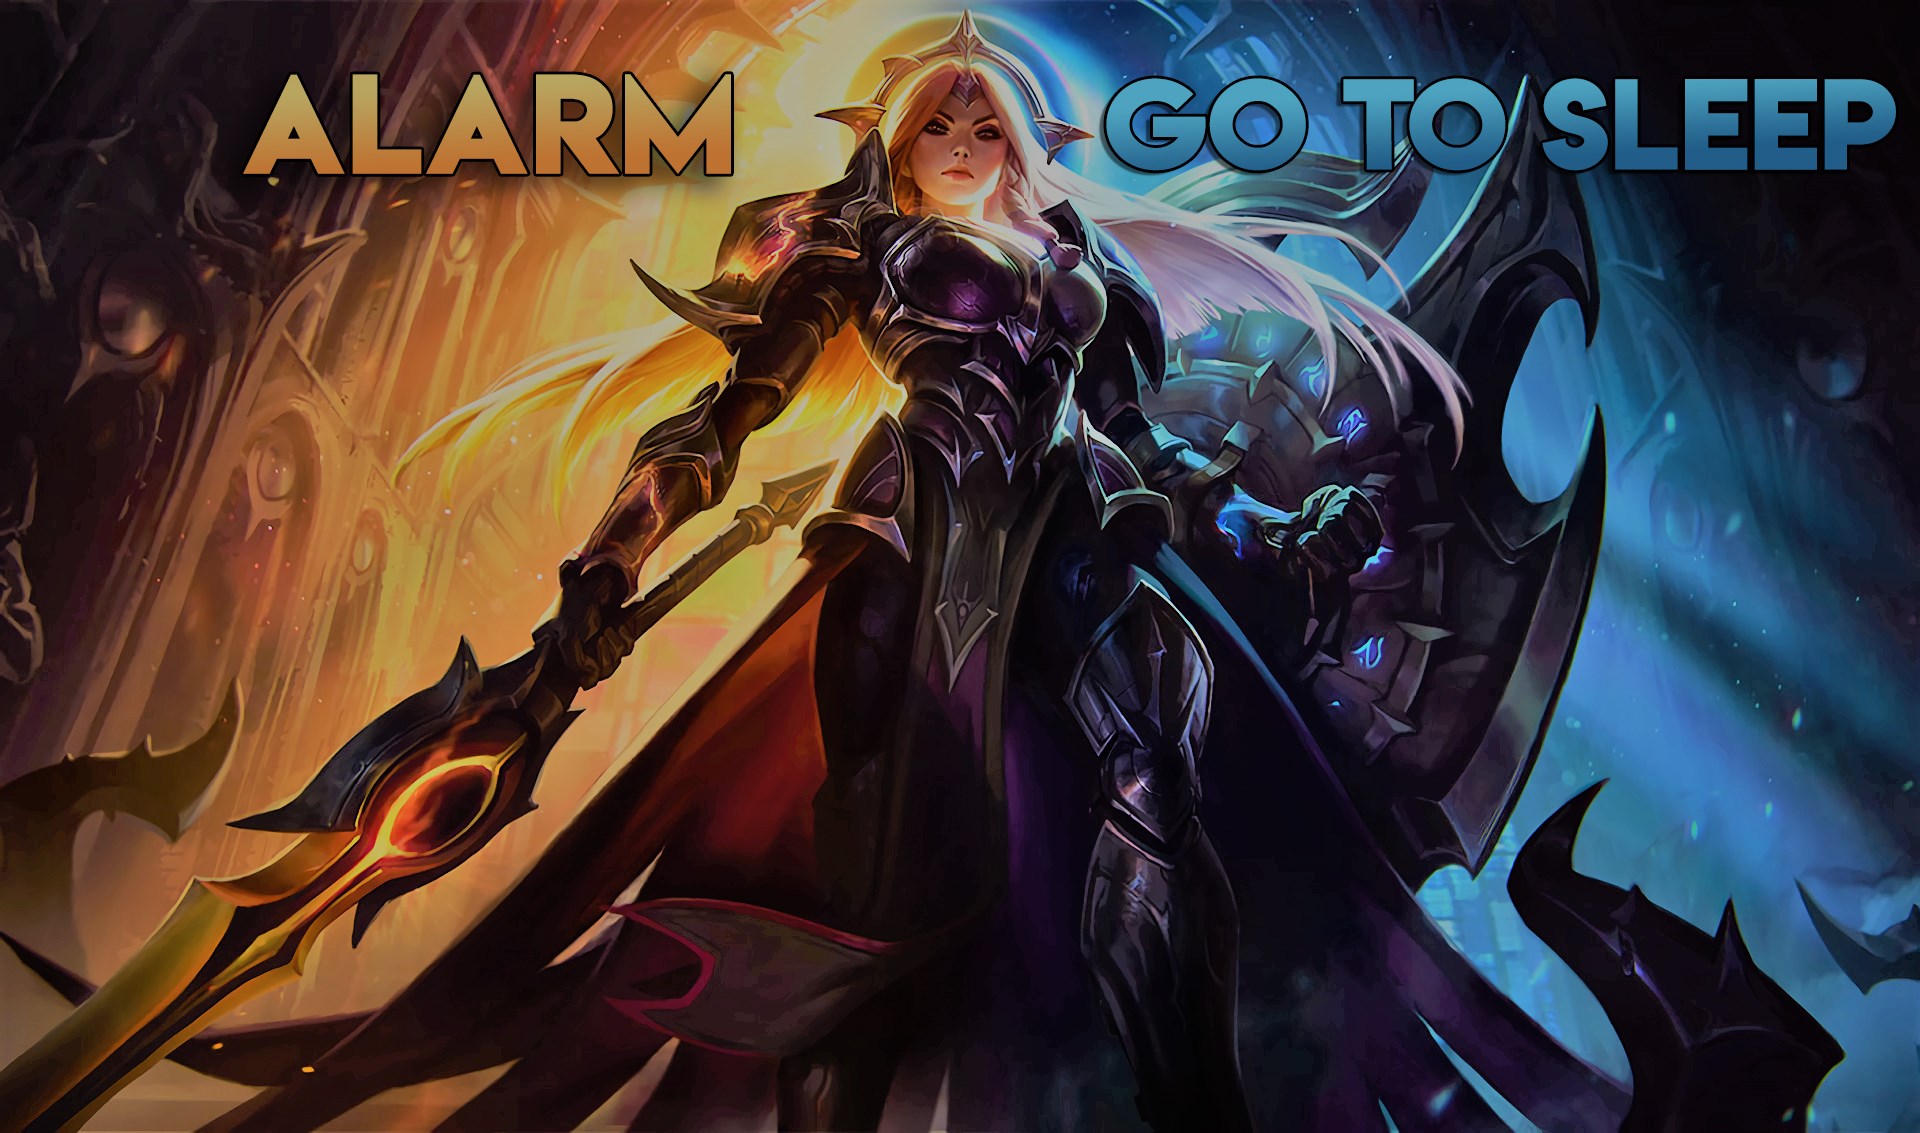 League Of Legends All Riot Games Songs Have The Same Theme As The Alarm And Go To Sleep Not A Gamer